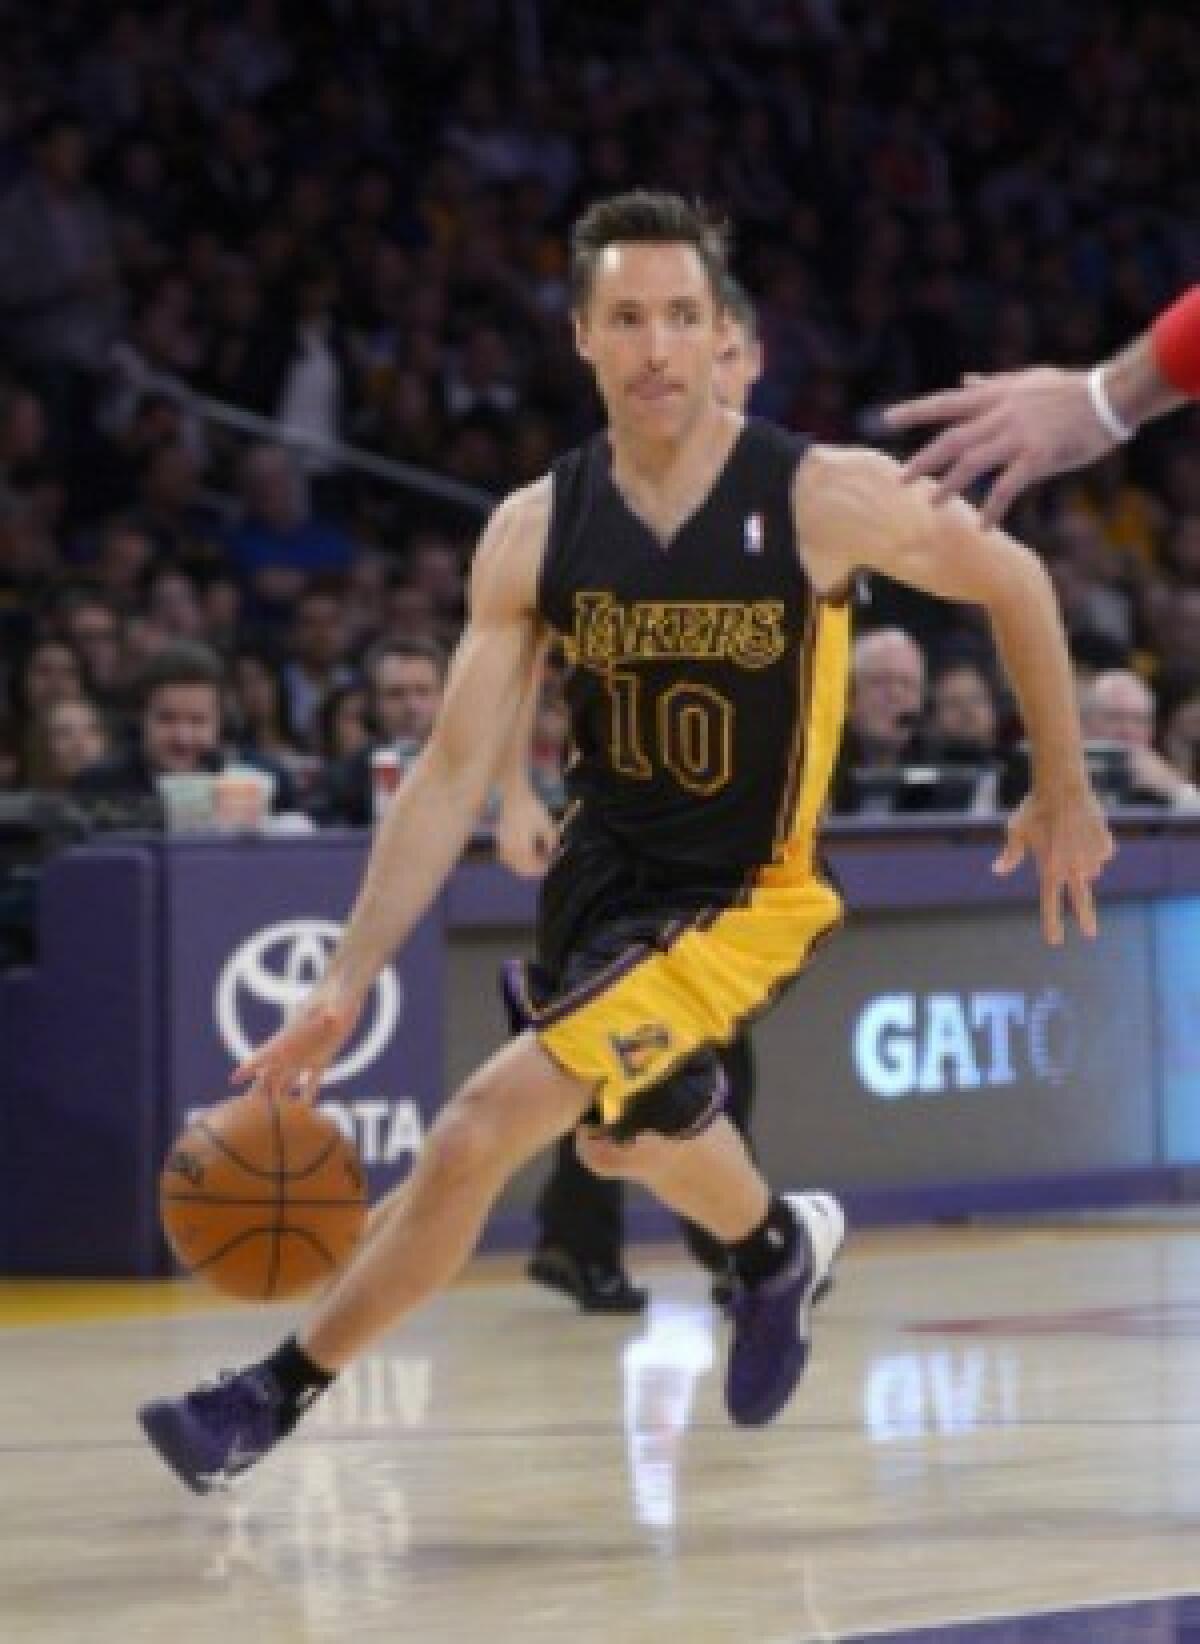 Steve Nash had 11 assists in 19 minutes for the Lakers on Friday.